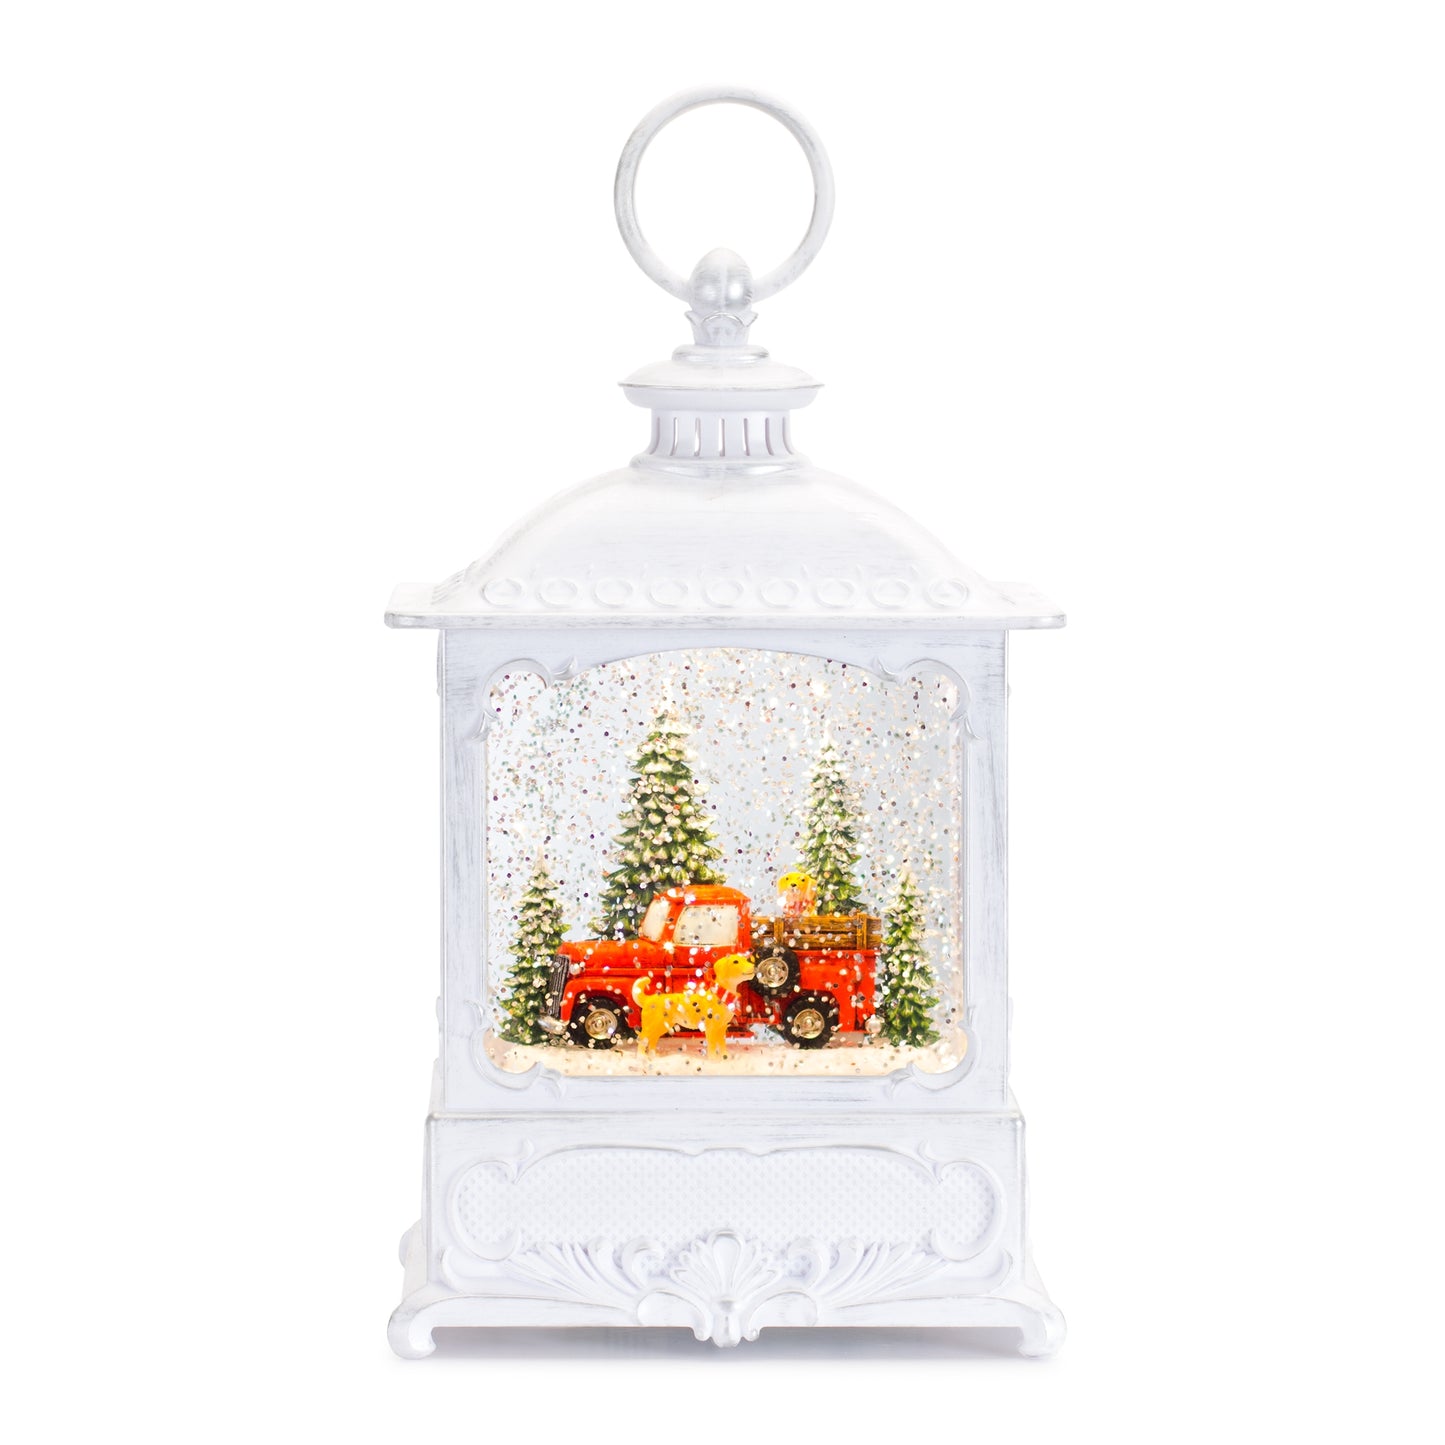 LED Snow Globe Lantern with Pickup Truck and Dog 10"H